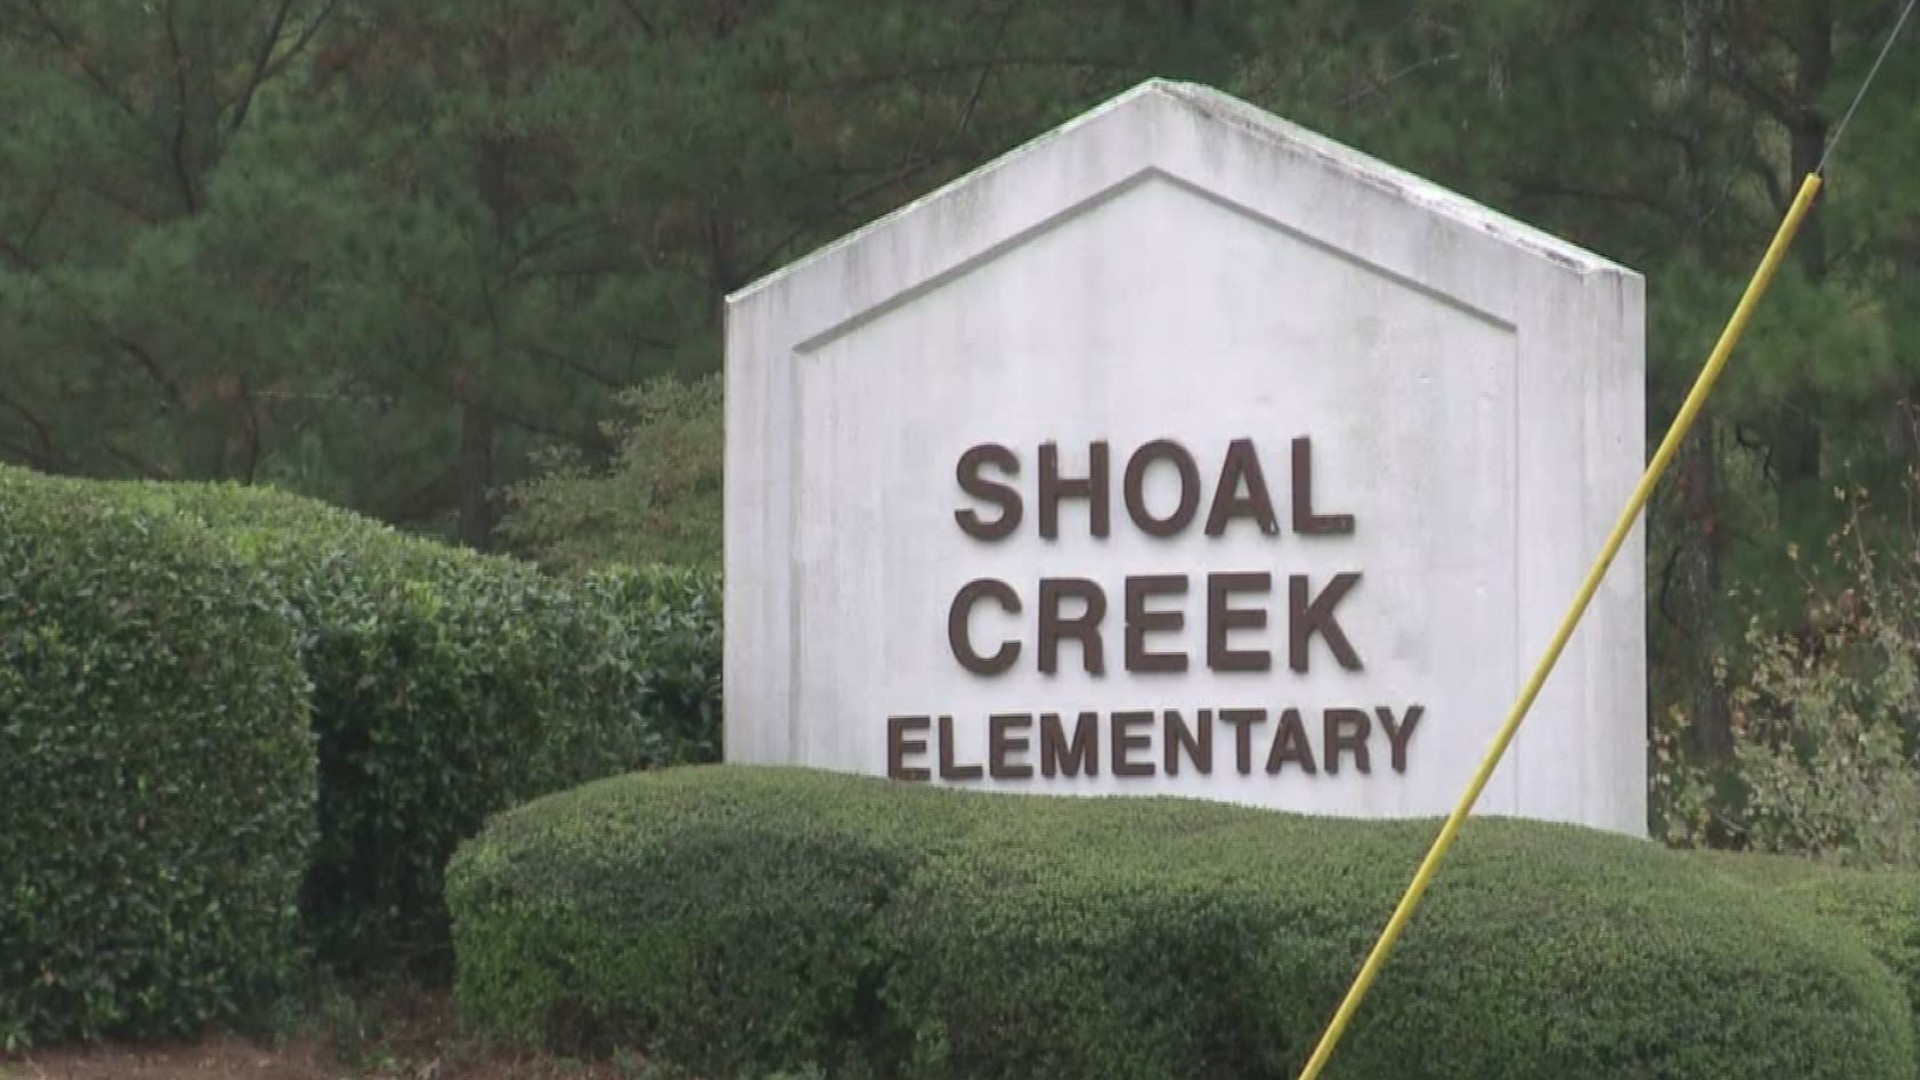 Shoal Creek Elementary School in Rockdale County is closed on Monday, due to an outbreak of norovirus among students and staff.